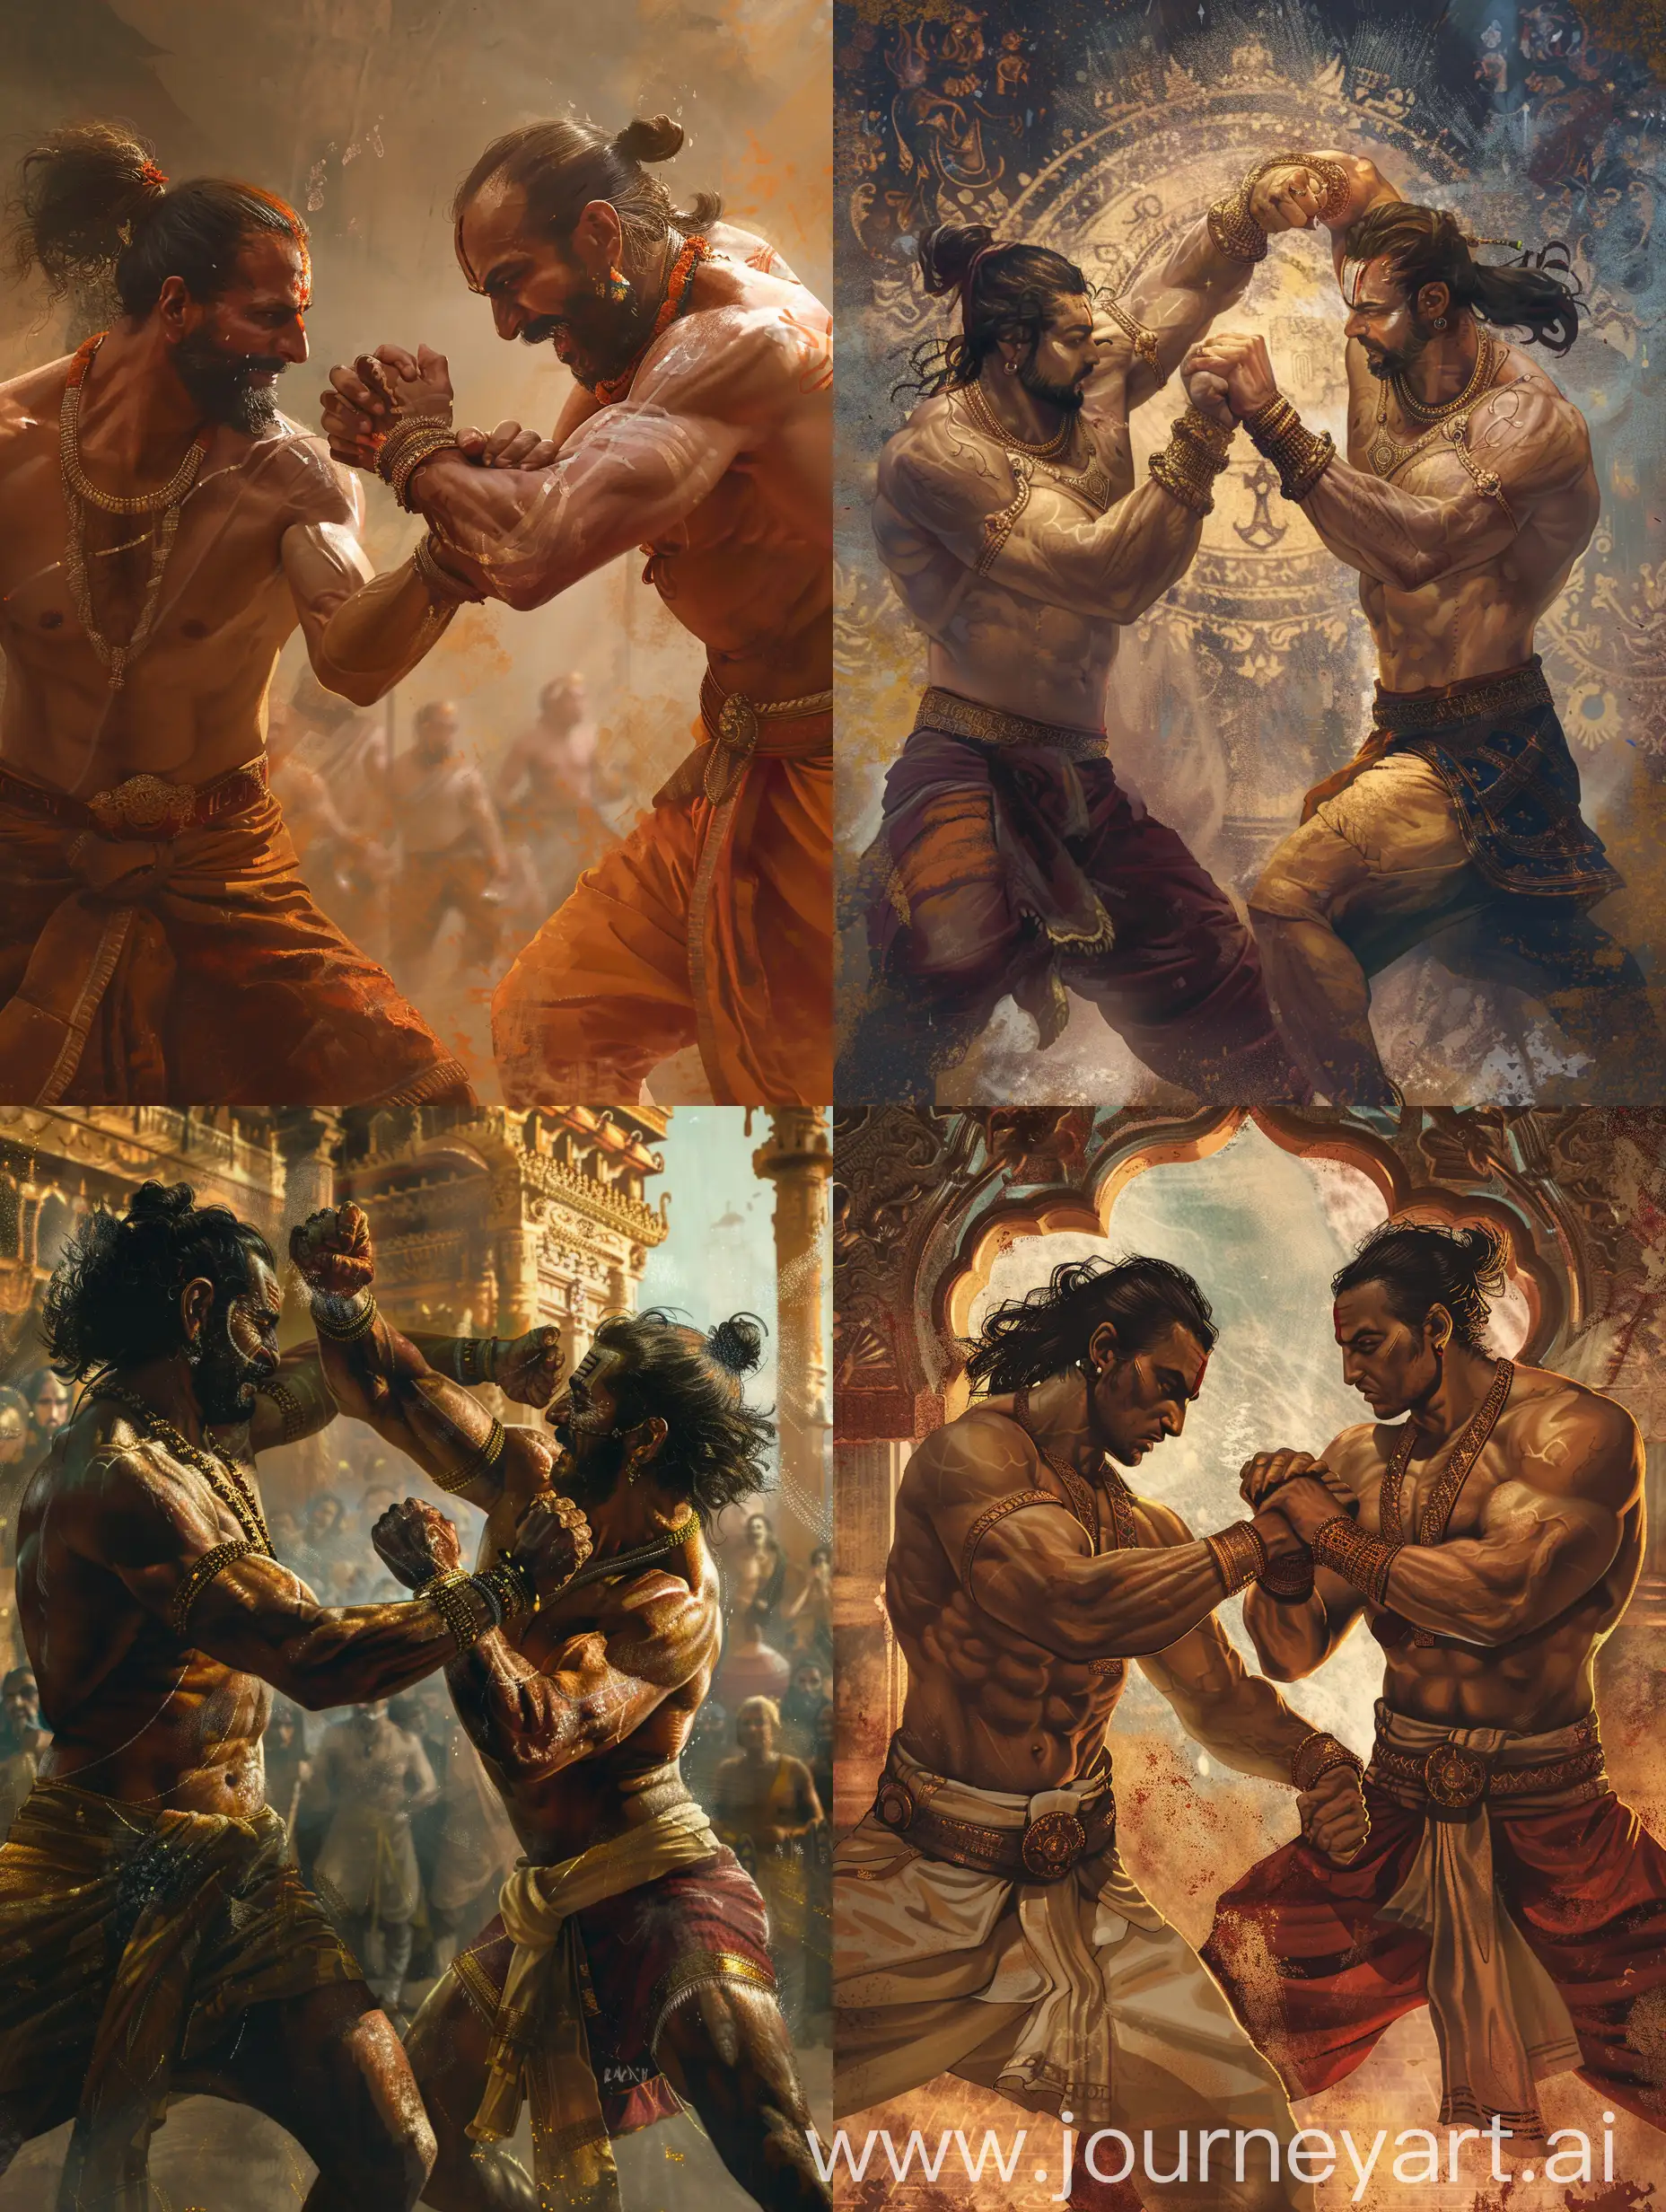 Ancient-Indian-Warriors-Engaged-in-Intricate-Sparring-8K-Quality-Art-Inspired-by-Raj-Ravi-Varma